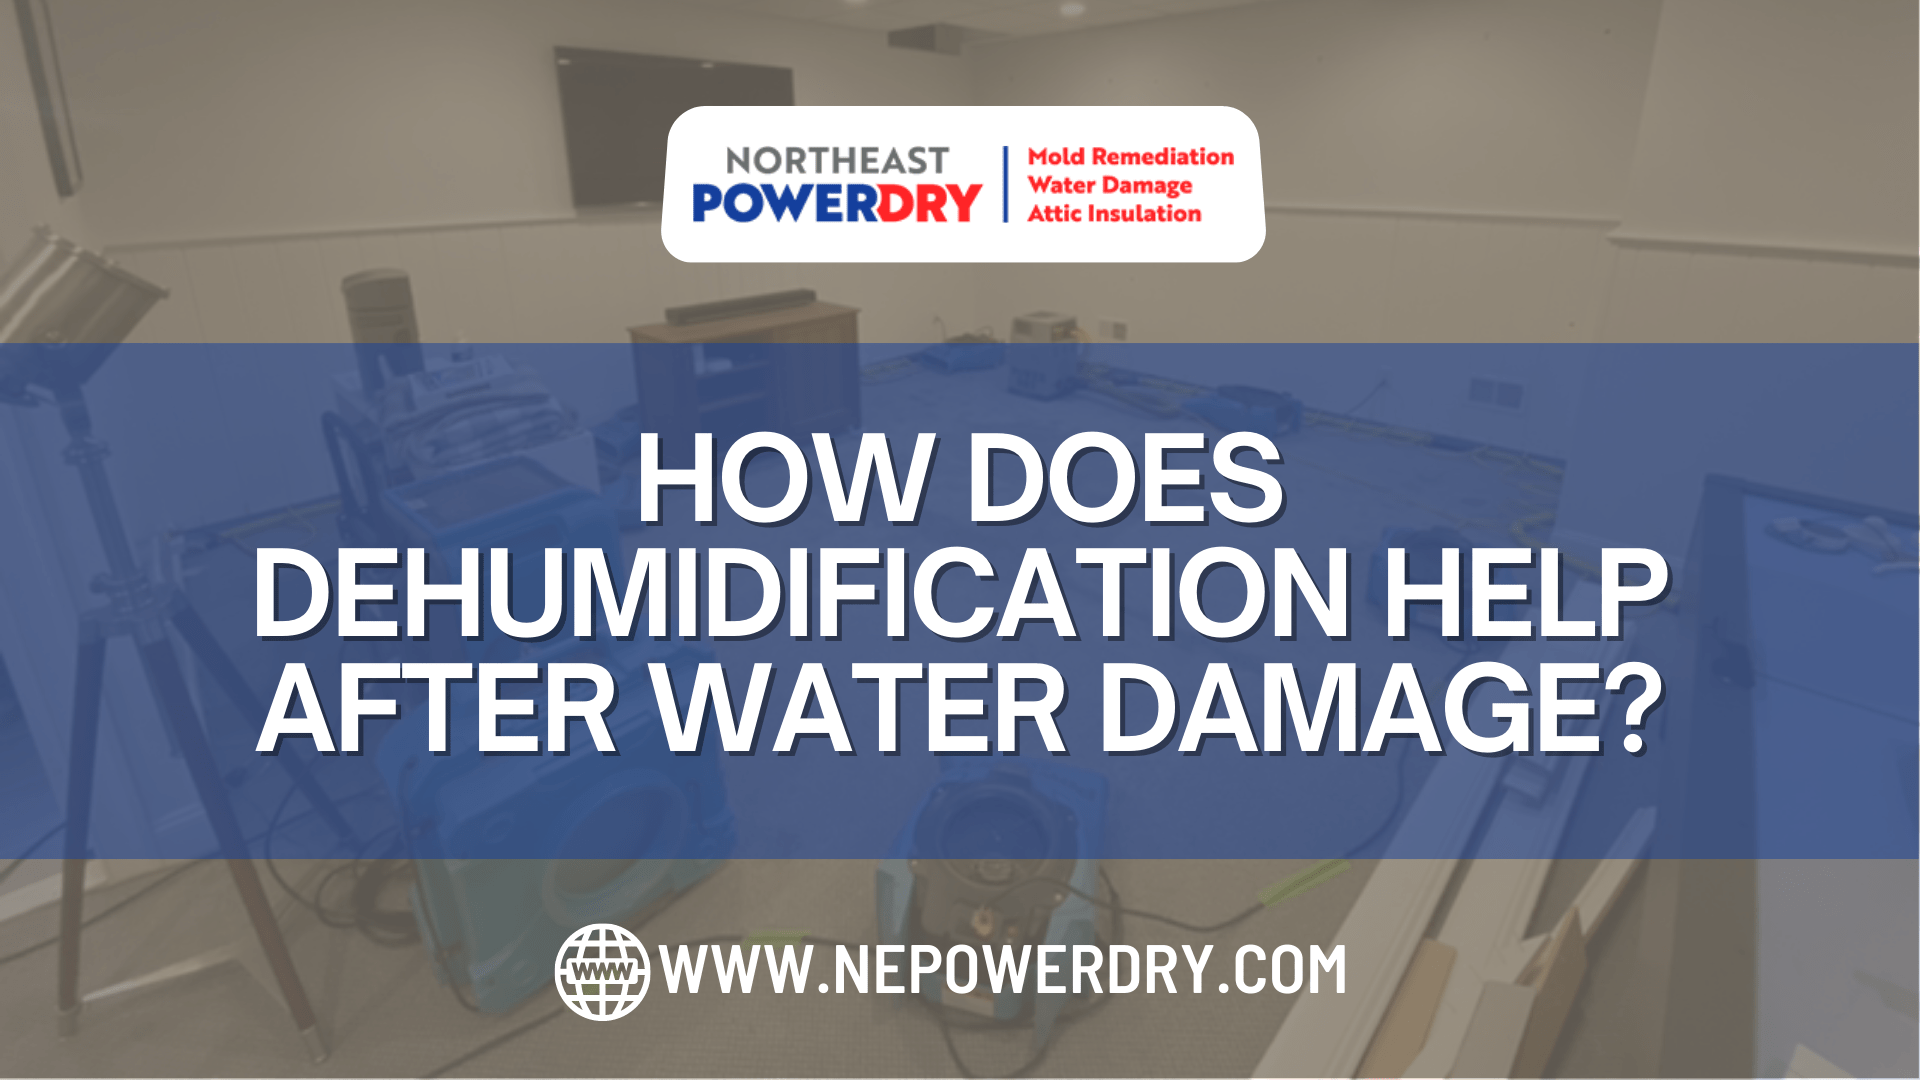 How Does Dehumidification Help After Water Damage?